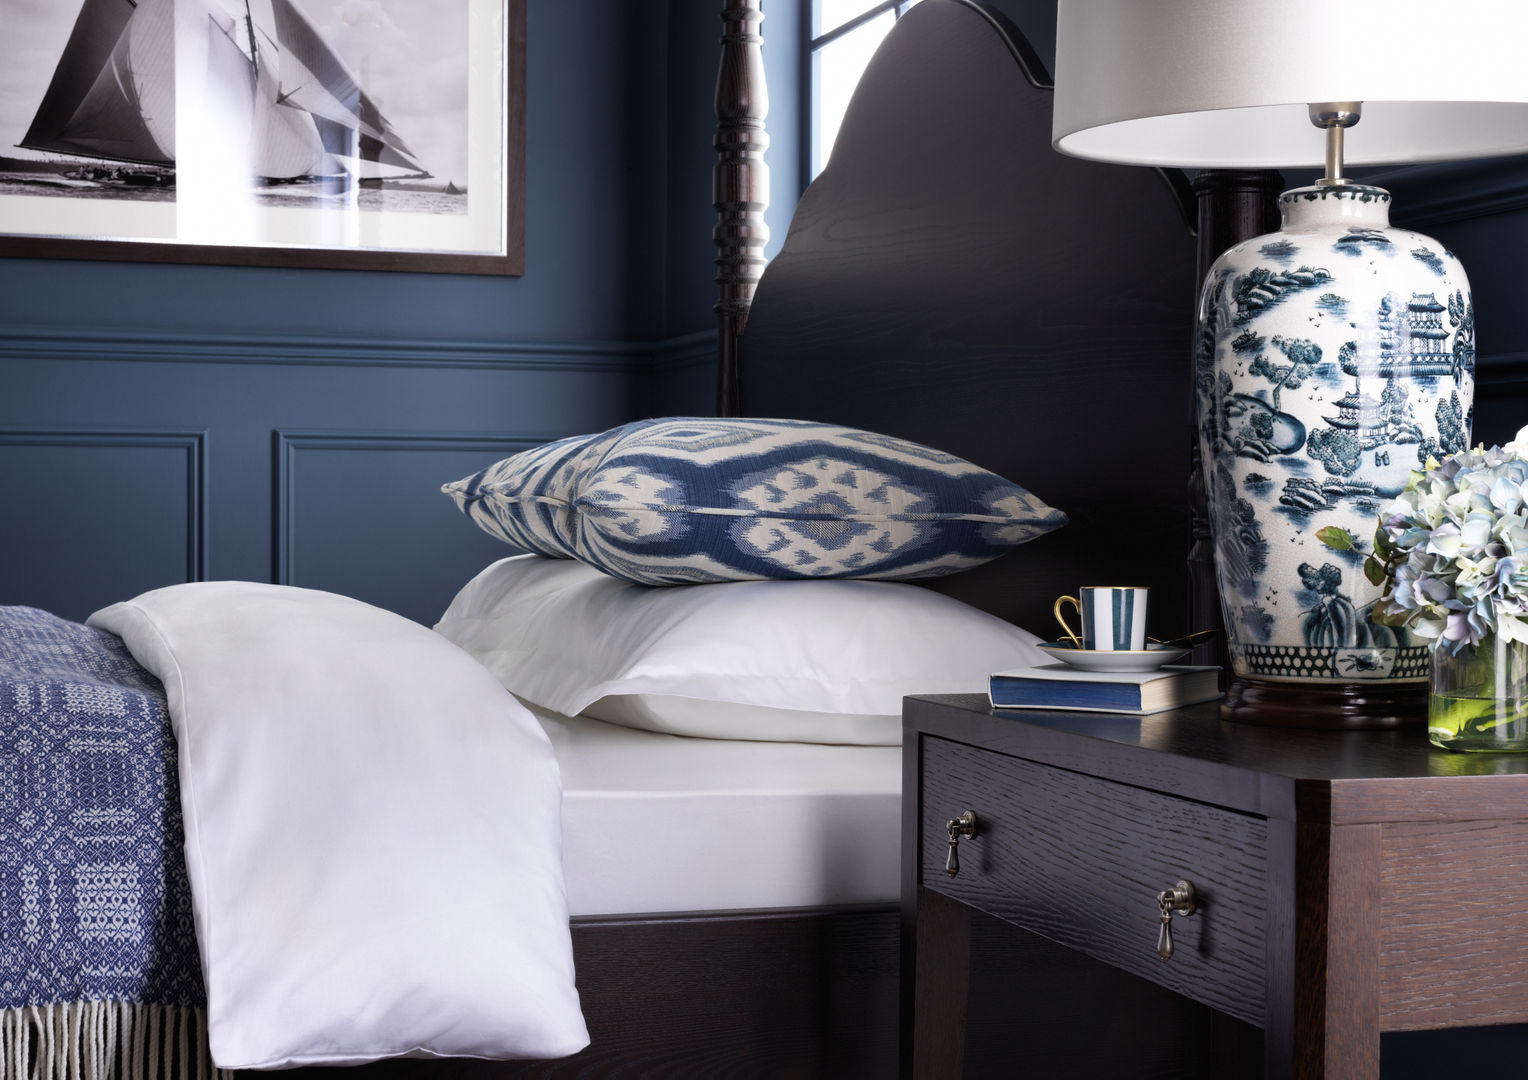 SS16 Style Guide - Coastal Elegance - Bedroom LuxDeco غرفة نوم country,bedroom,blue,bedside table